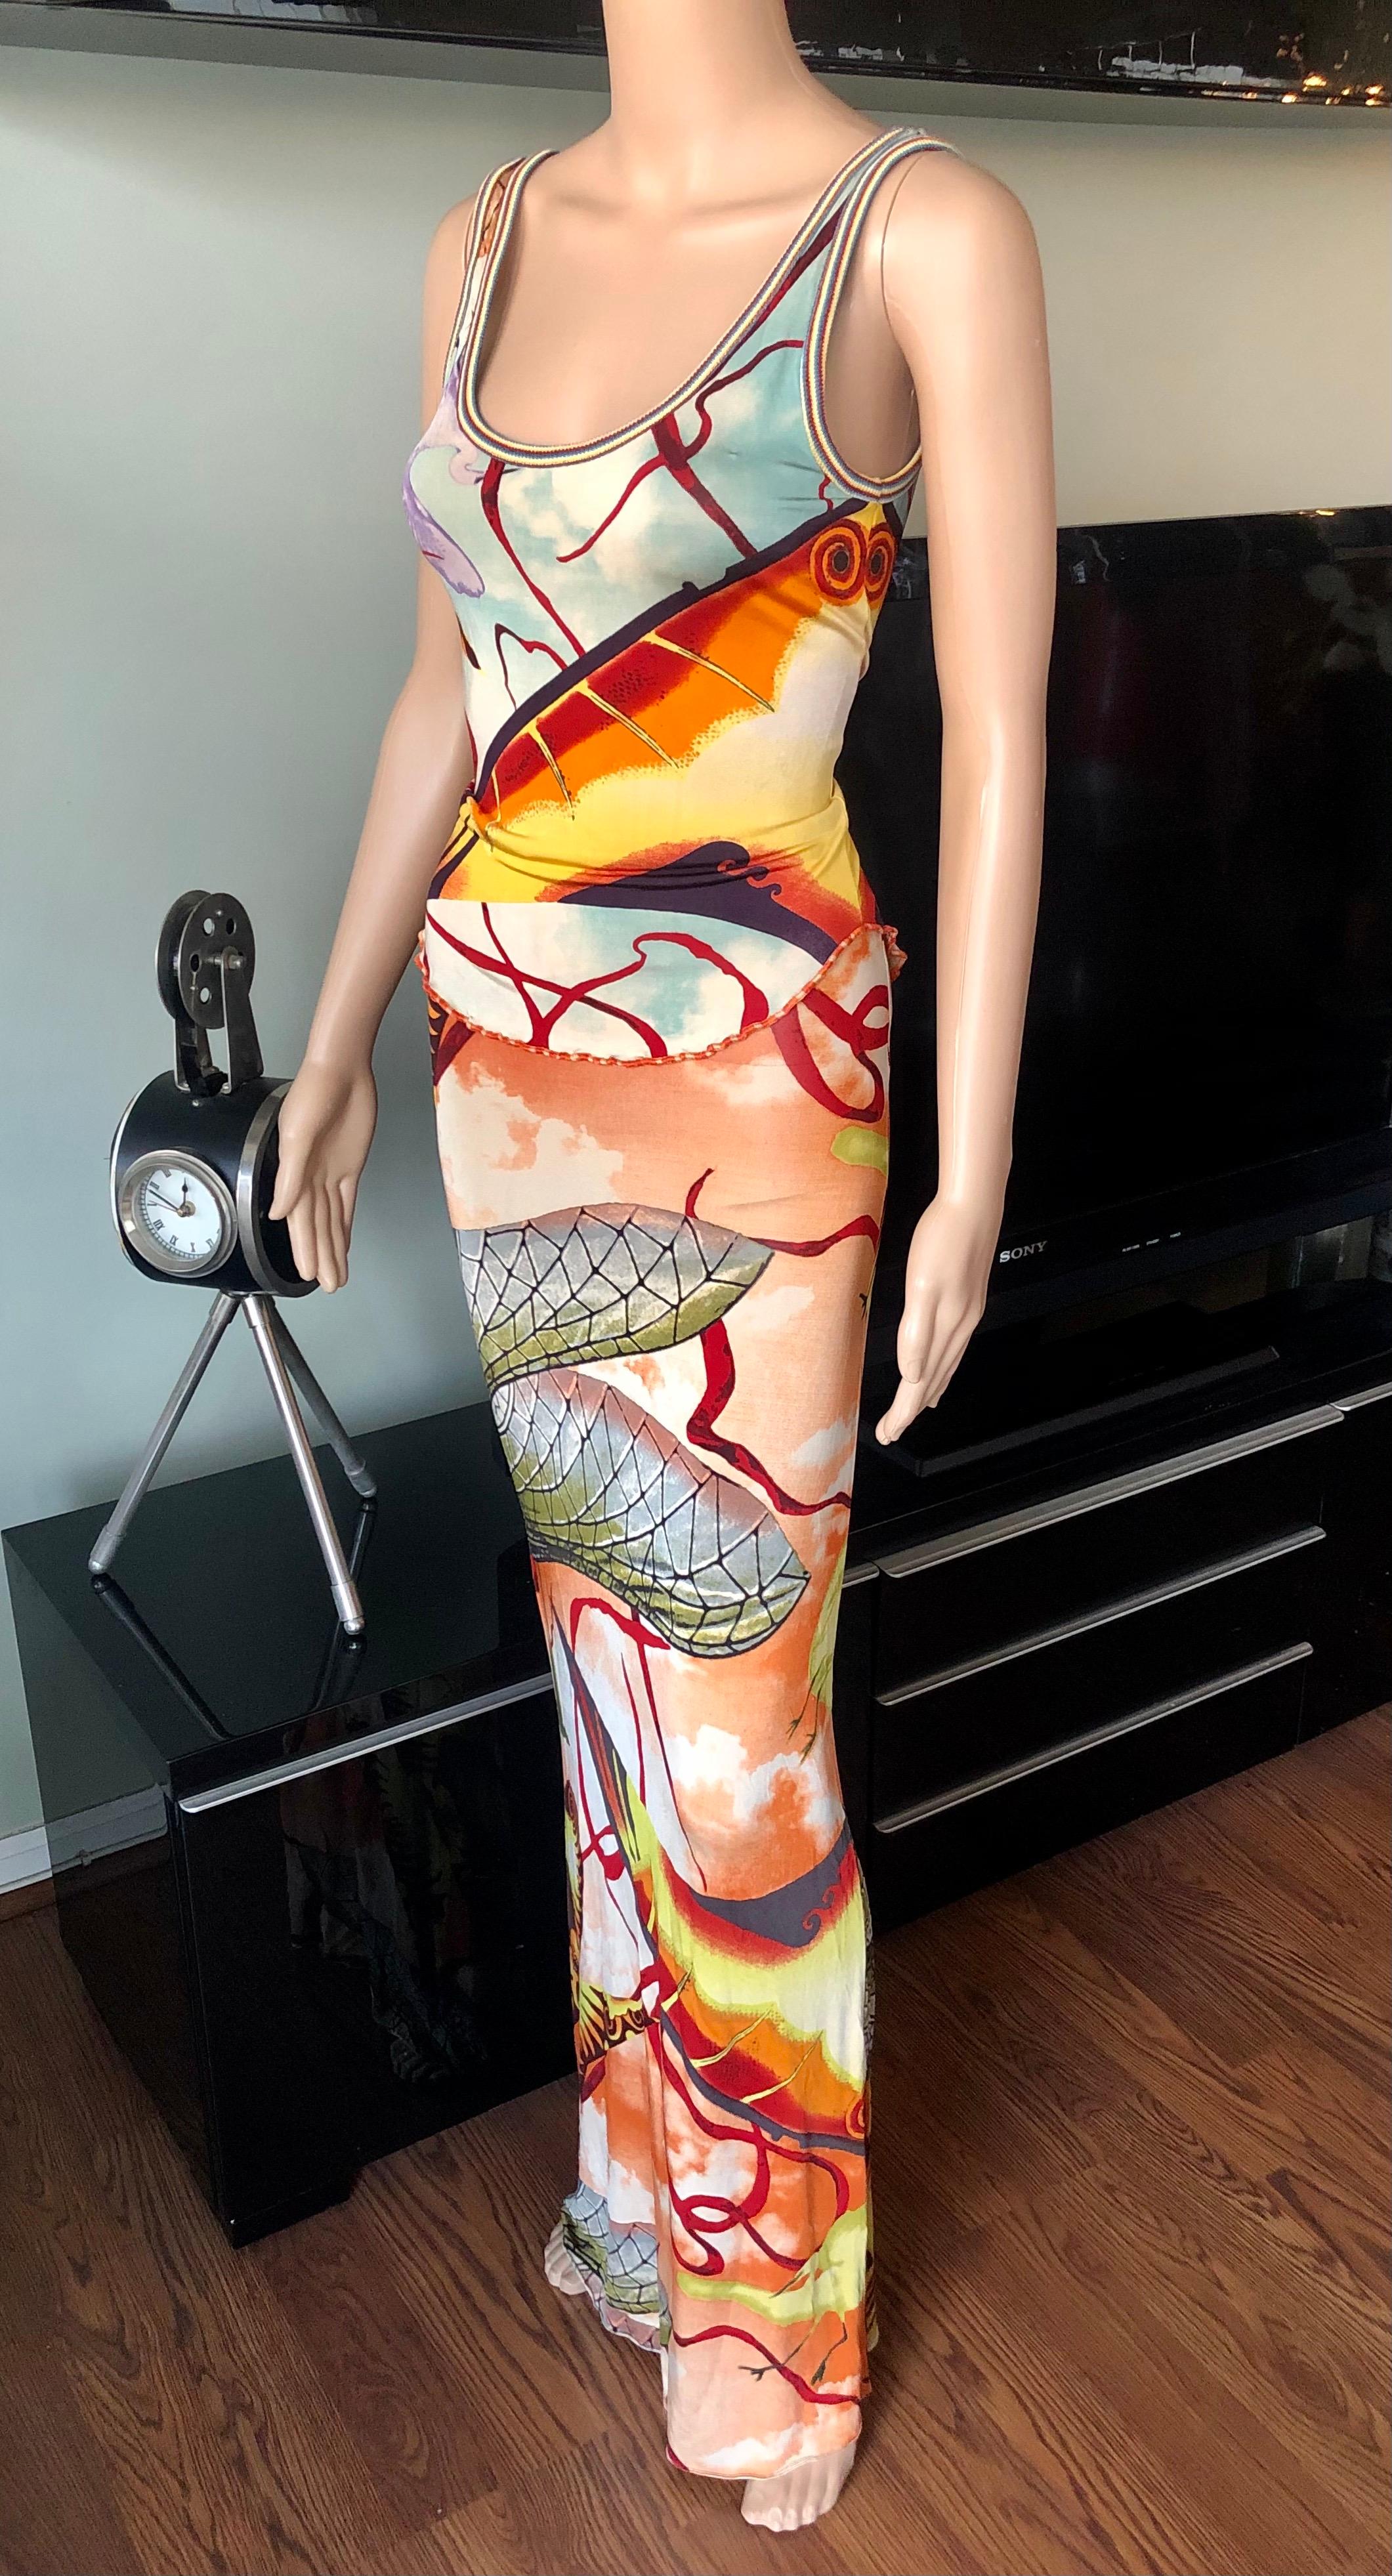 Jean Paul Gaultier Vintage Unworn with Tags Abstract Salvador Dali Print Tank Top & Maxi Skirt 2 Piece Set Size S

